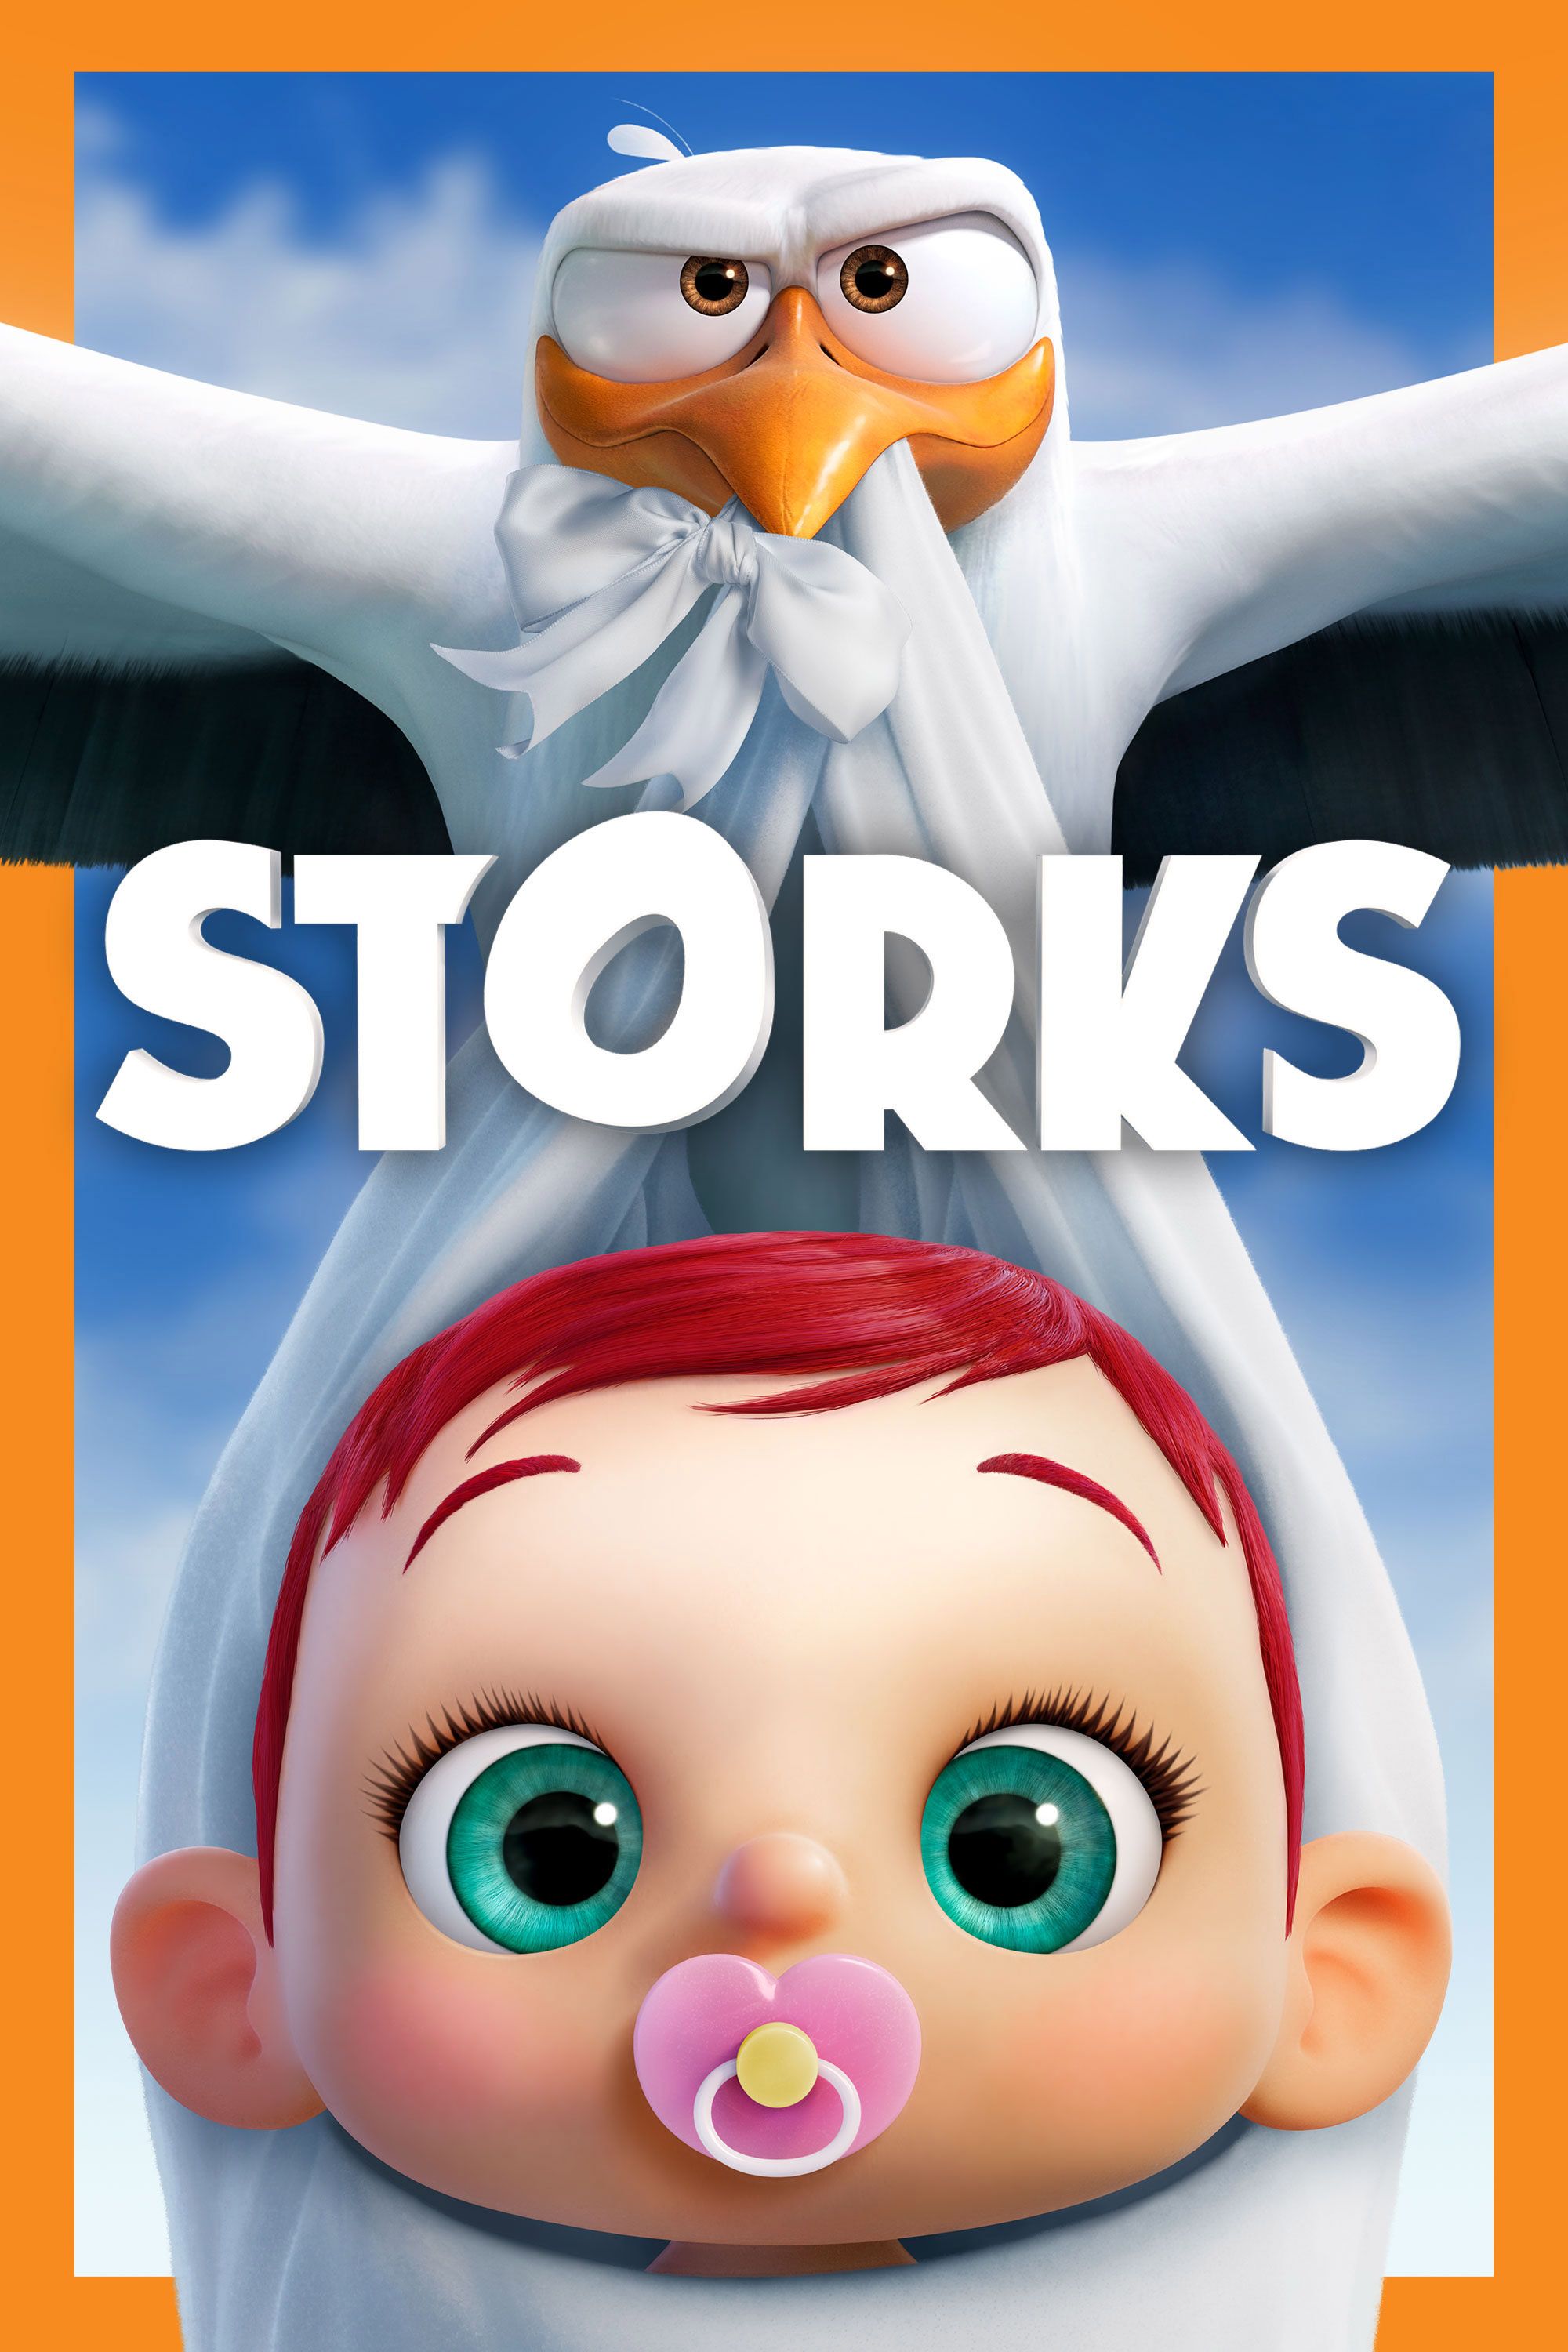 avicienna indrajid recommends storks movie free download pic